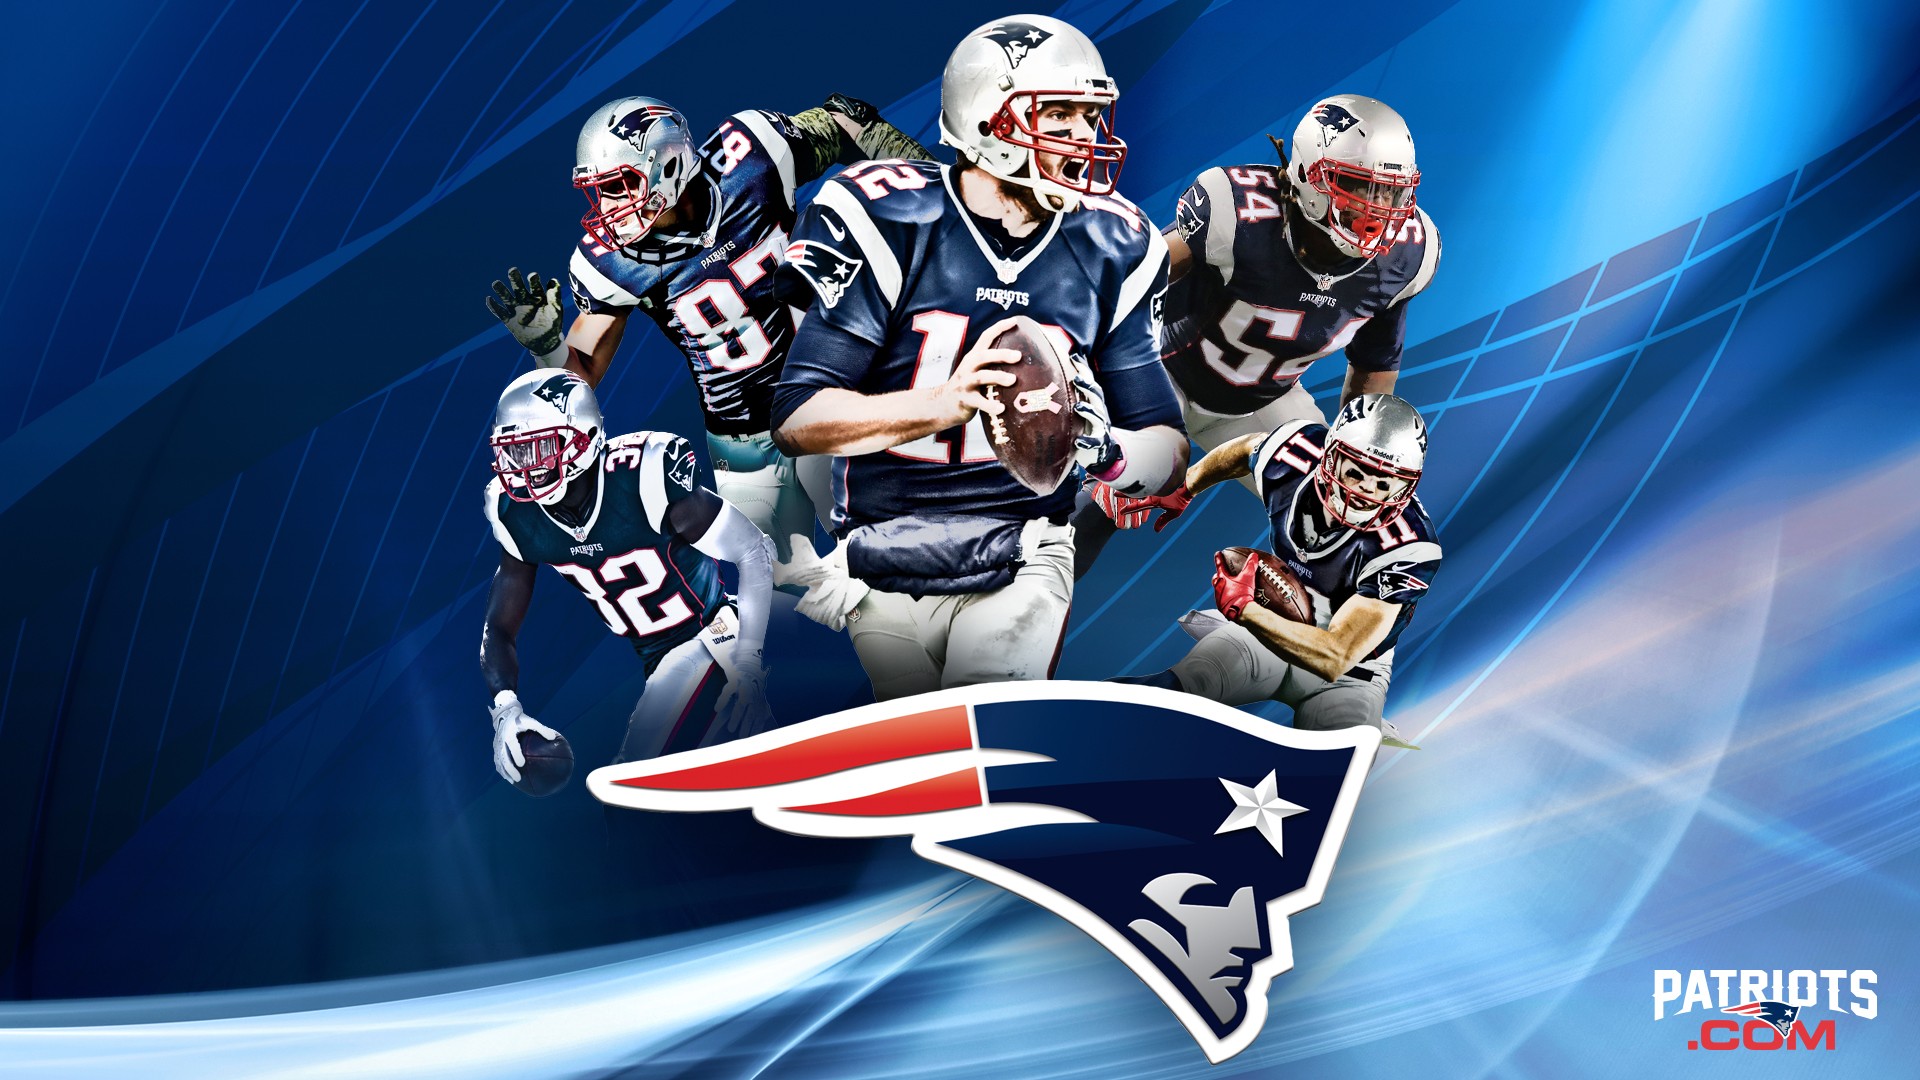 New England Patriots For Desktop Wallpaper with resolution 1920x1080 pixel. You can make this wallpaper for your Mac or Windows Desktop Background, iPhone, Android or Tablet and another Smartphone device